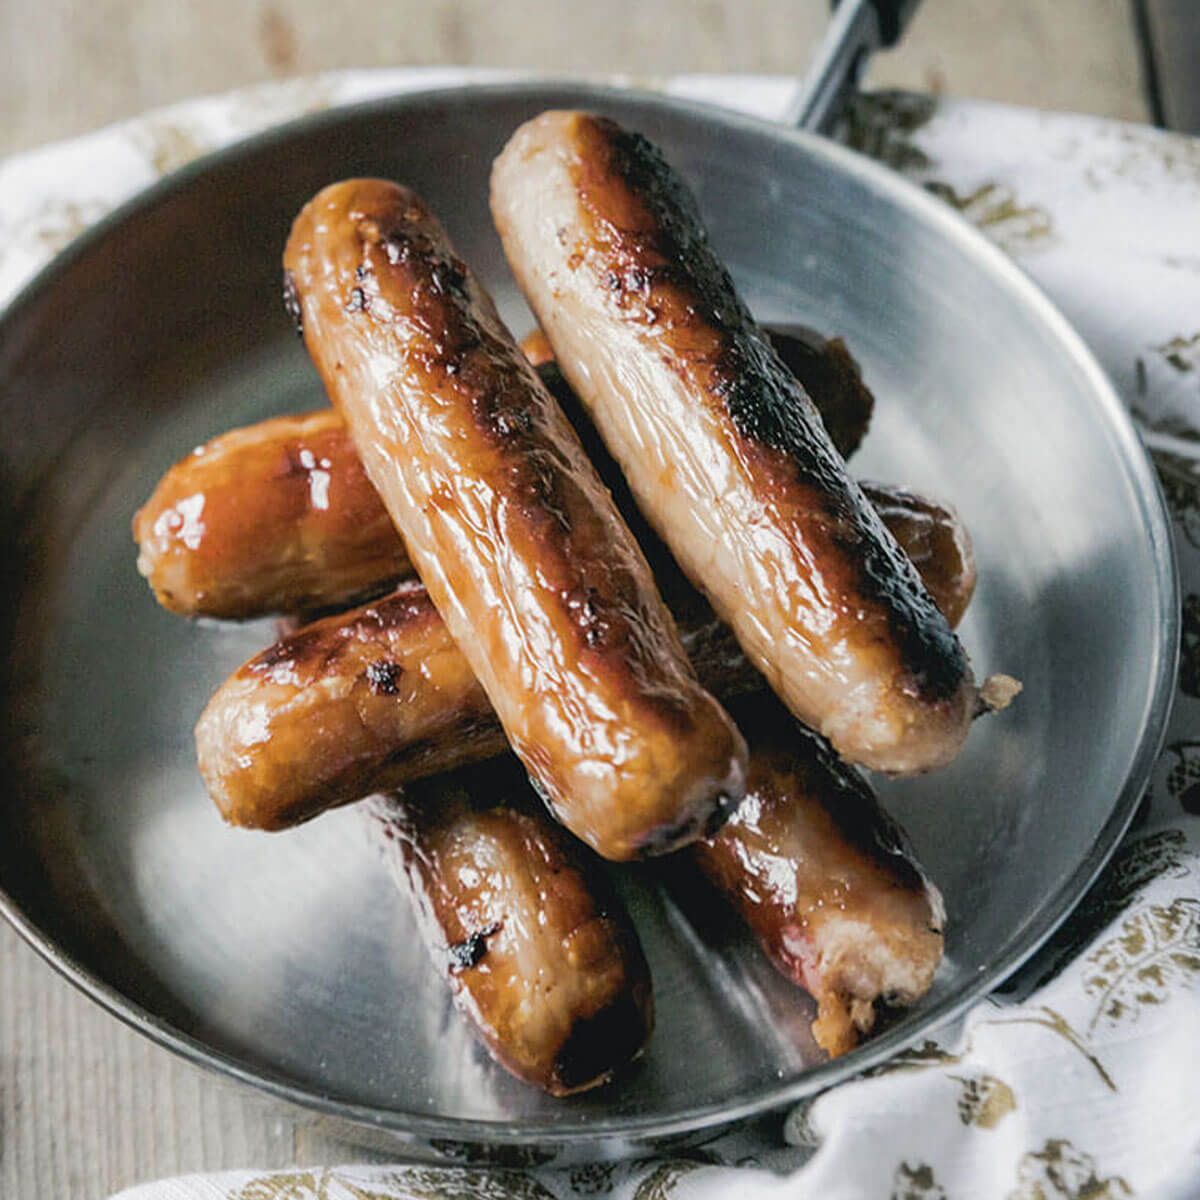 Countrystyle Pork Sausages